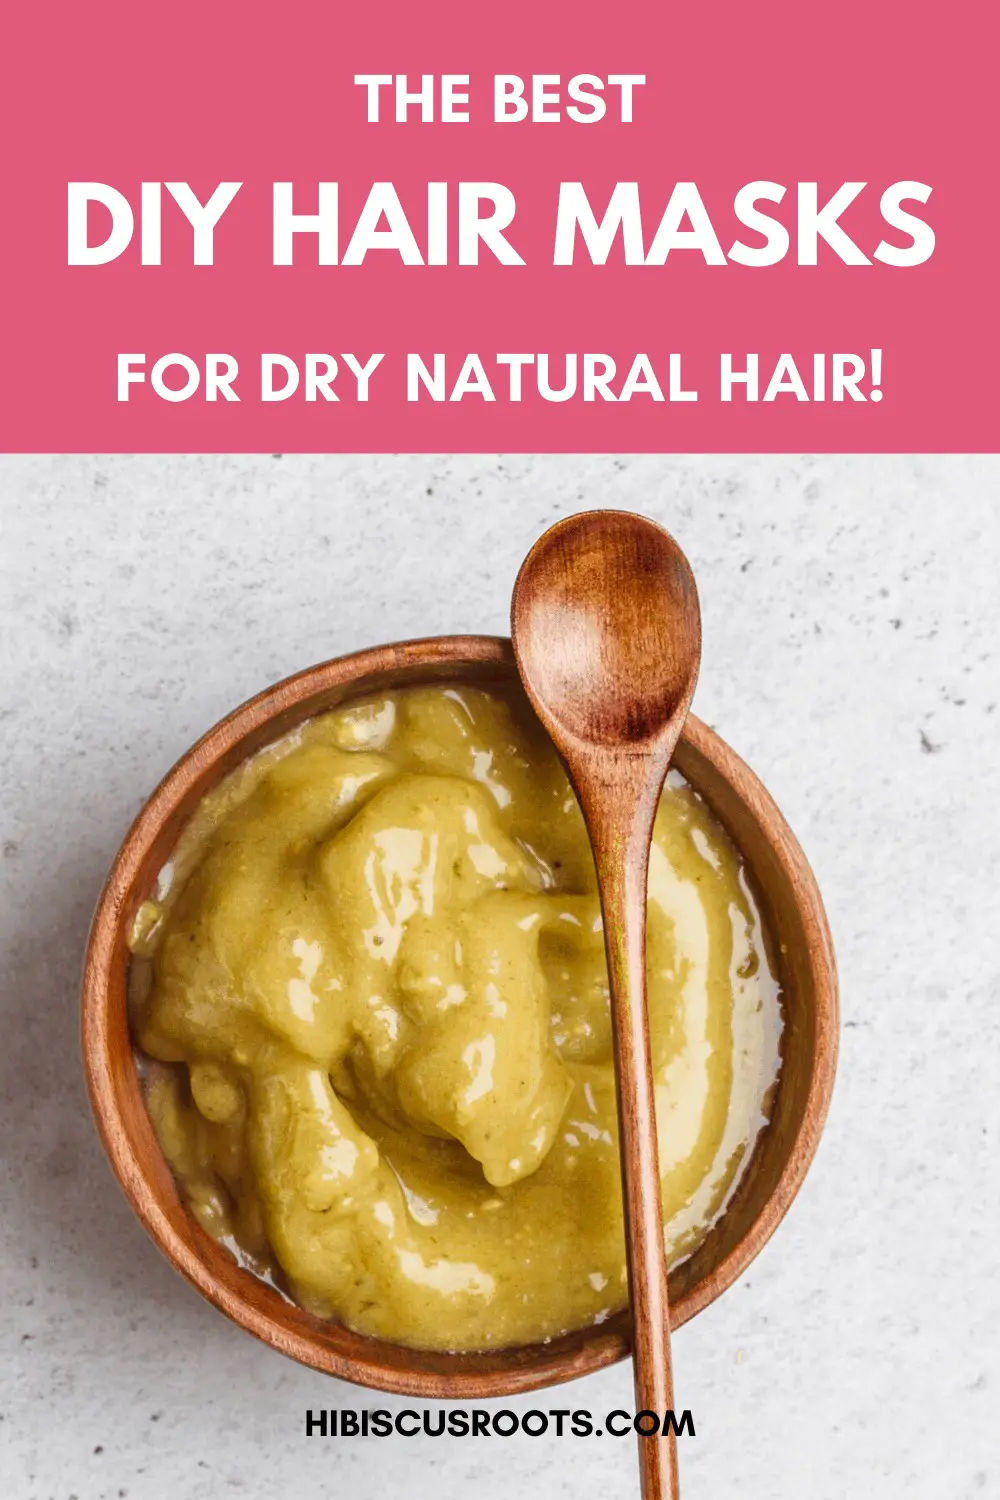 5 Diy Hair Mask Recipes For Extremely